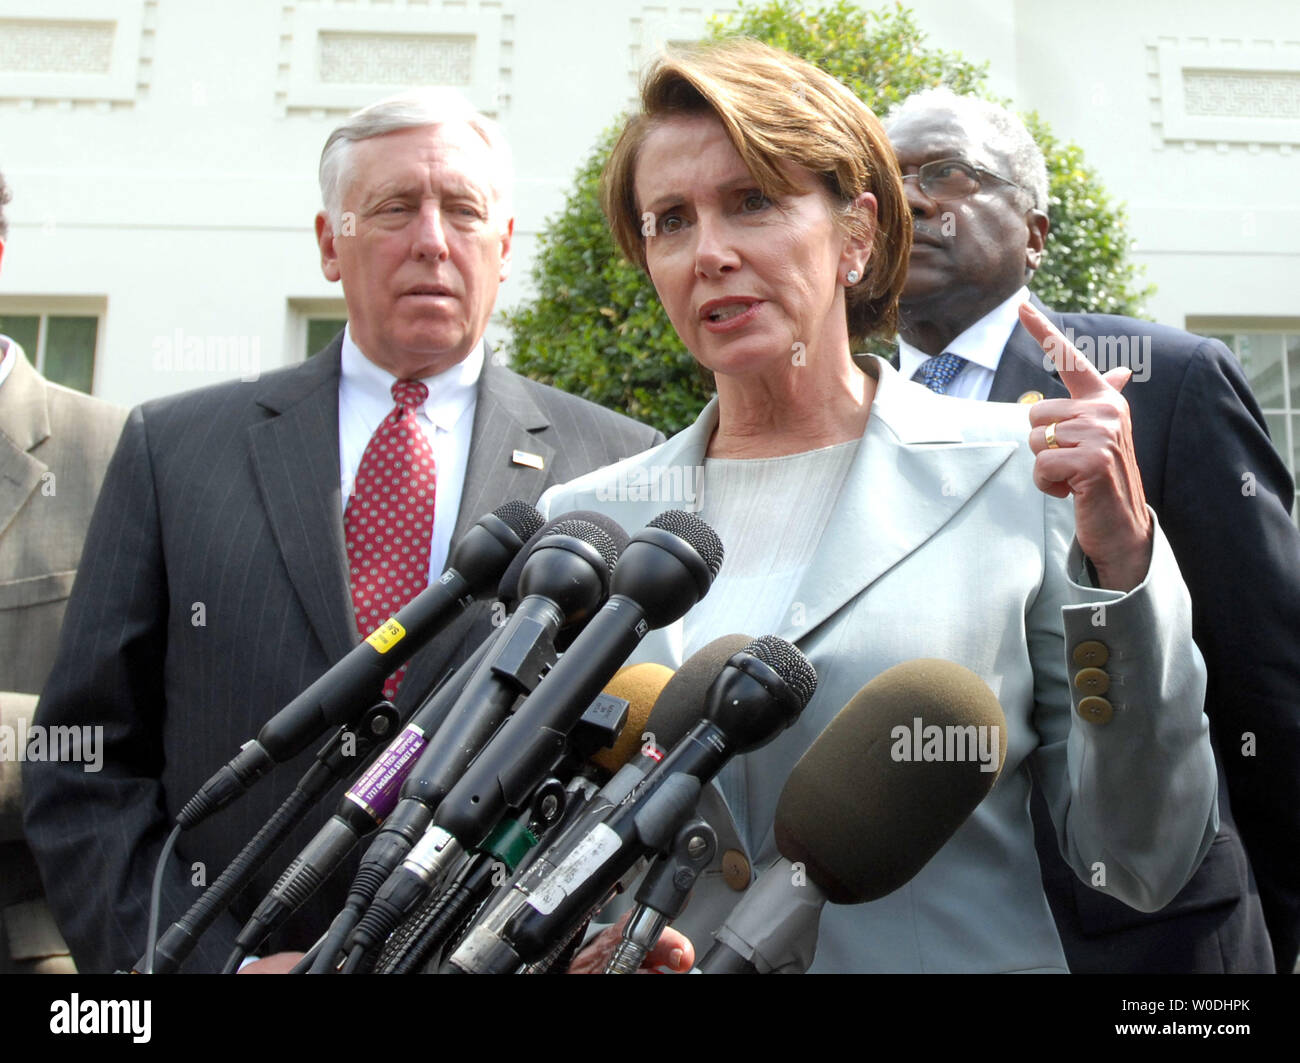 Speaker of the House Nancy Pelosi, D-CA, Sen. Steny Hoyer D-MD, (L) and Rep. James Clyburn, D-SC, speak with the media after meeting with U.S. President George W. Bush and Republican Congressional leaders about an Iraq War spending bill at the White House in Washington on May 2, 2007.     (UPI Photo/Roger L. Wollenberg) Stock Photo